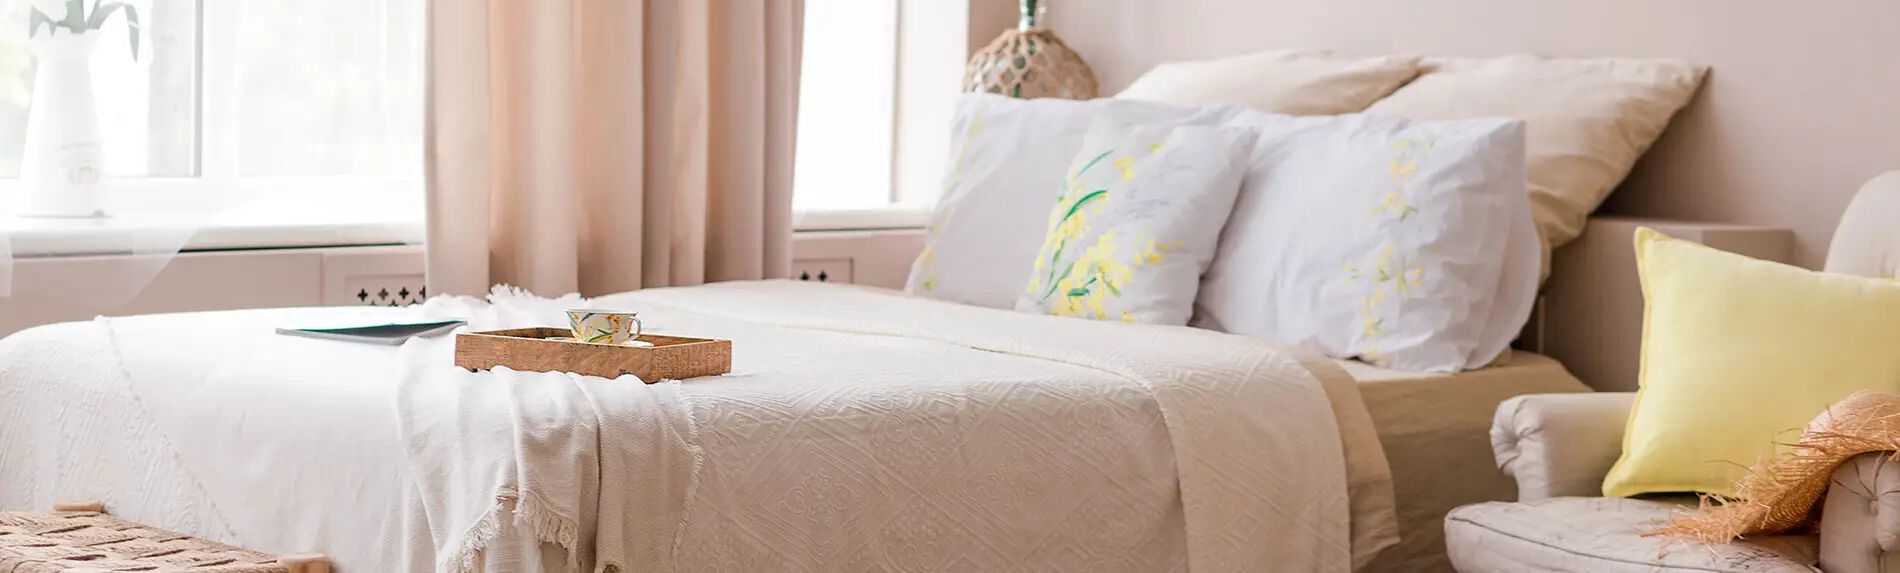 Additional Ideas for Your Dreamy Guest Bedroom